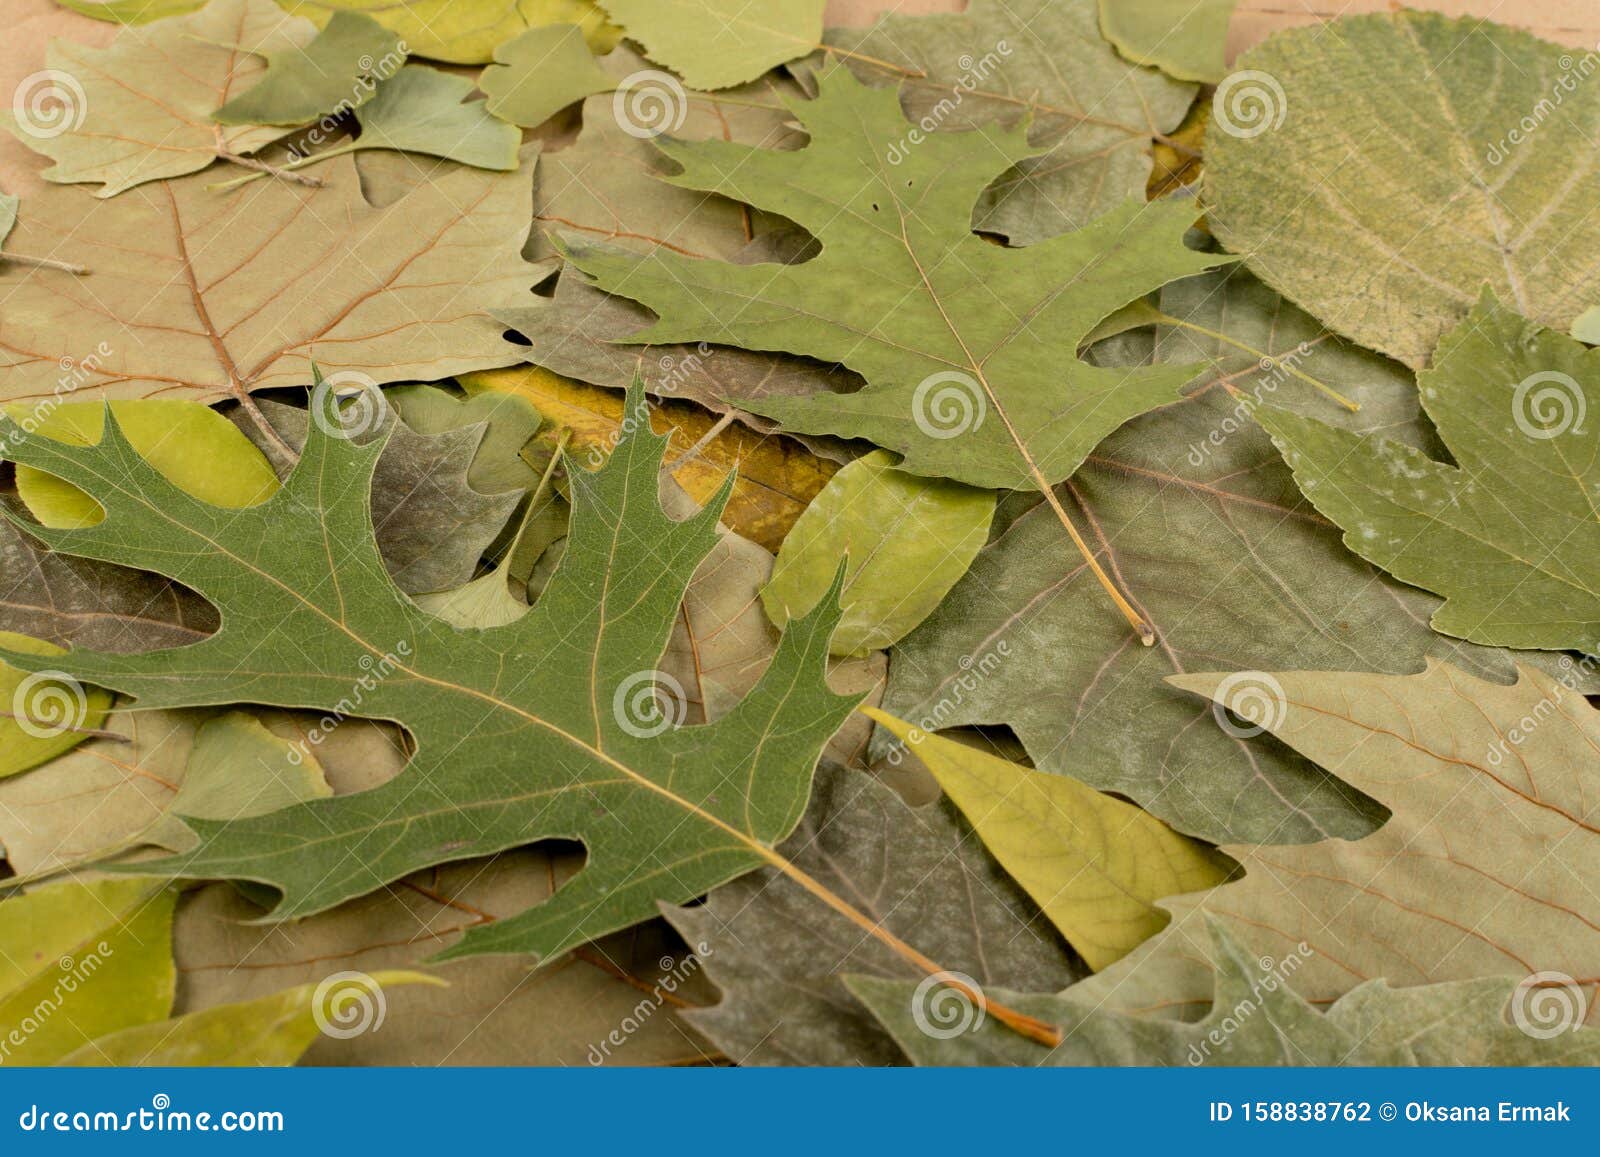 Flat Dried Leaves Or Forest Floor In Camouflage Colors Stock Photo